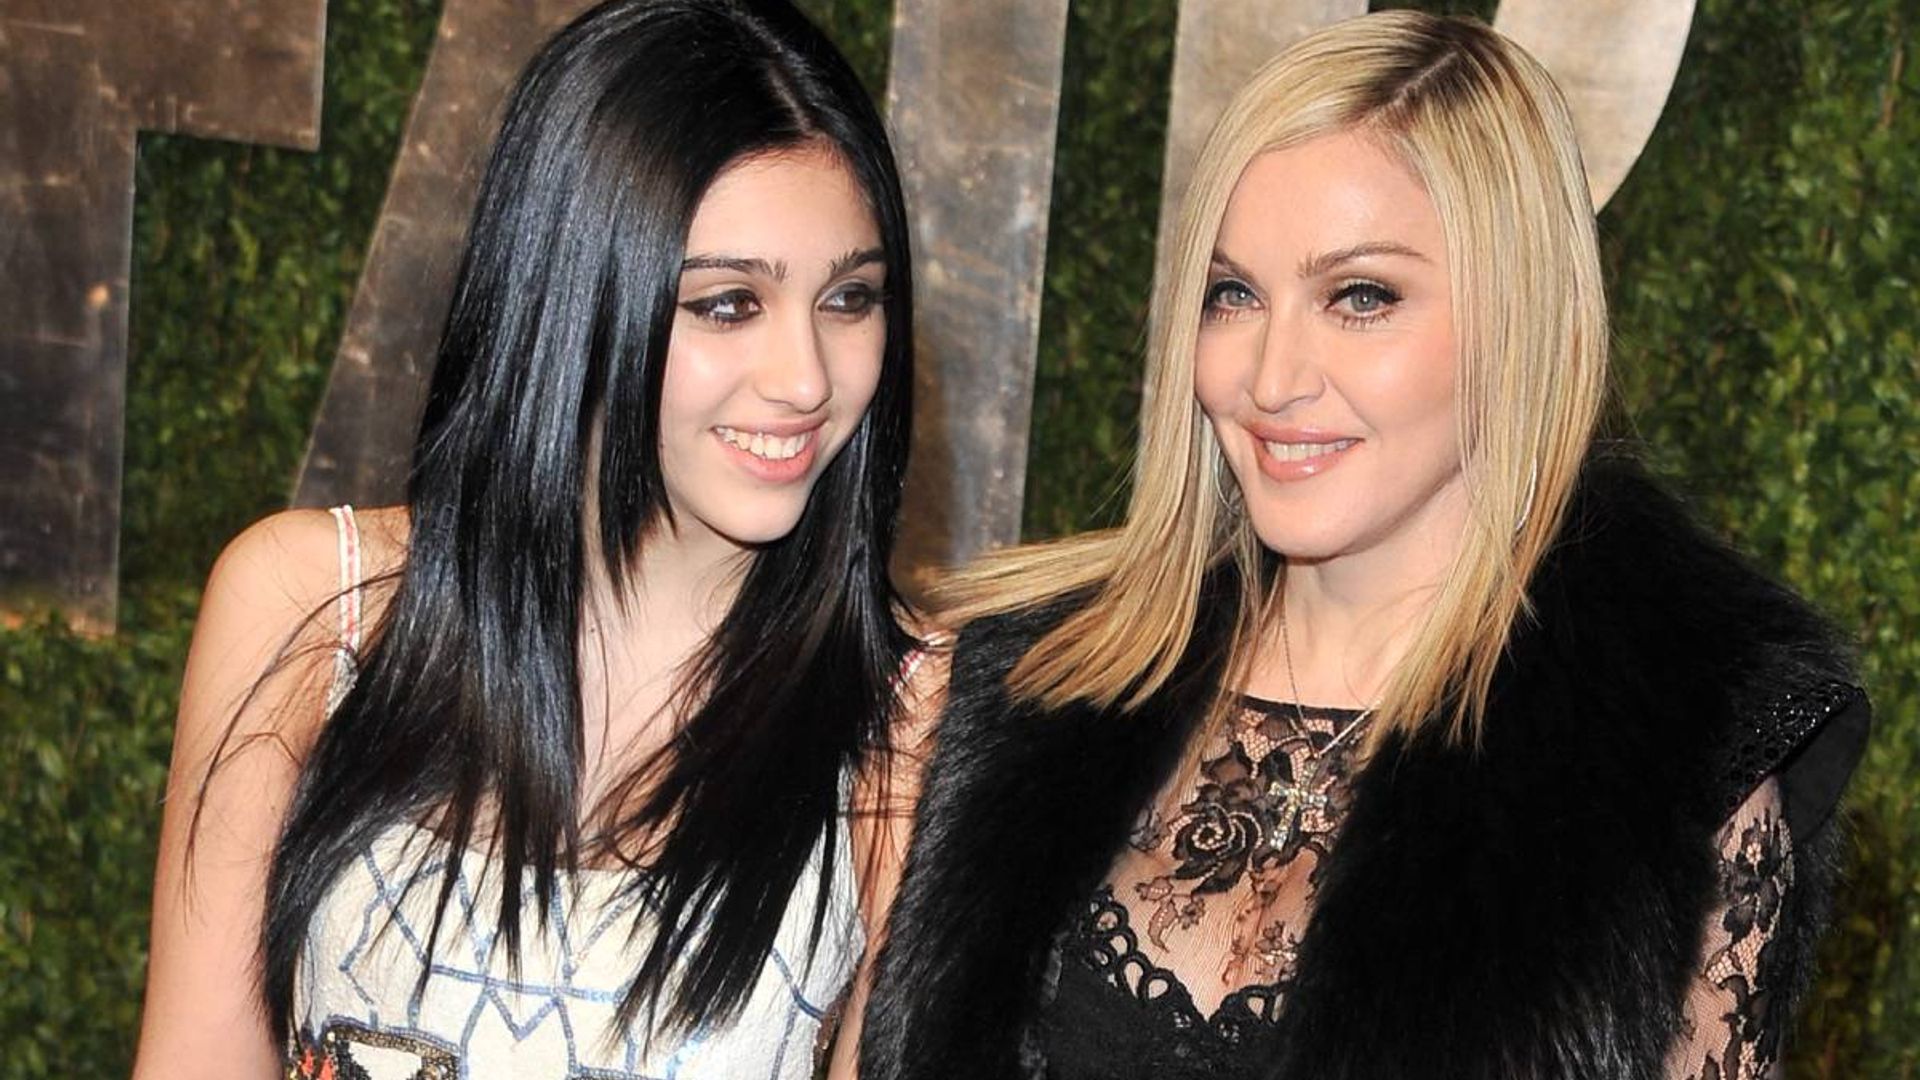 Madonna's daughter Lourdes looks identical to famous mum in unearthed school photos